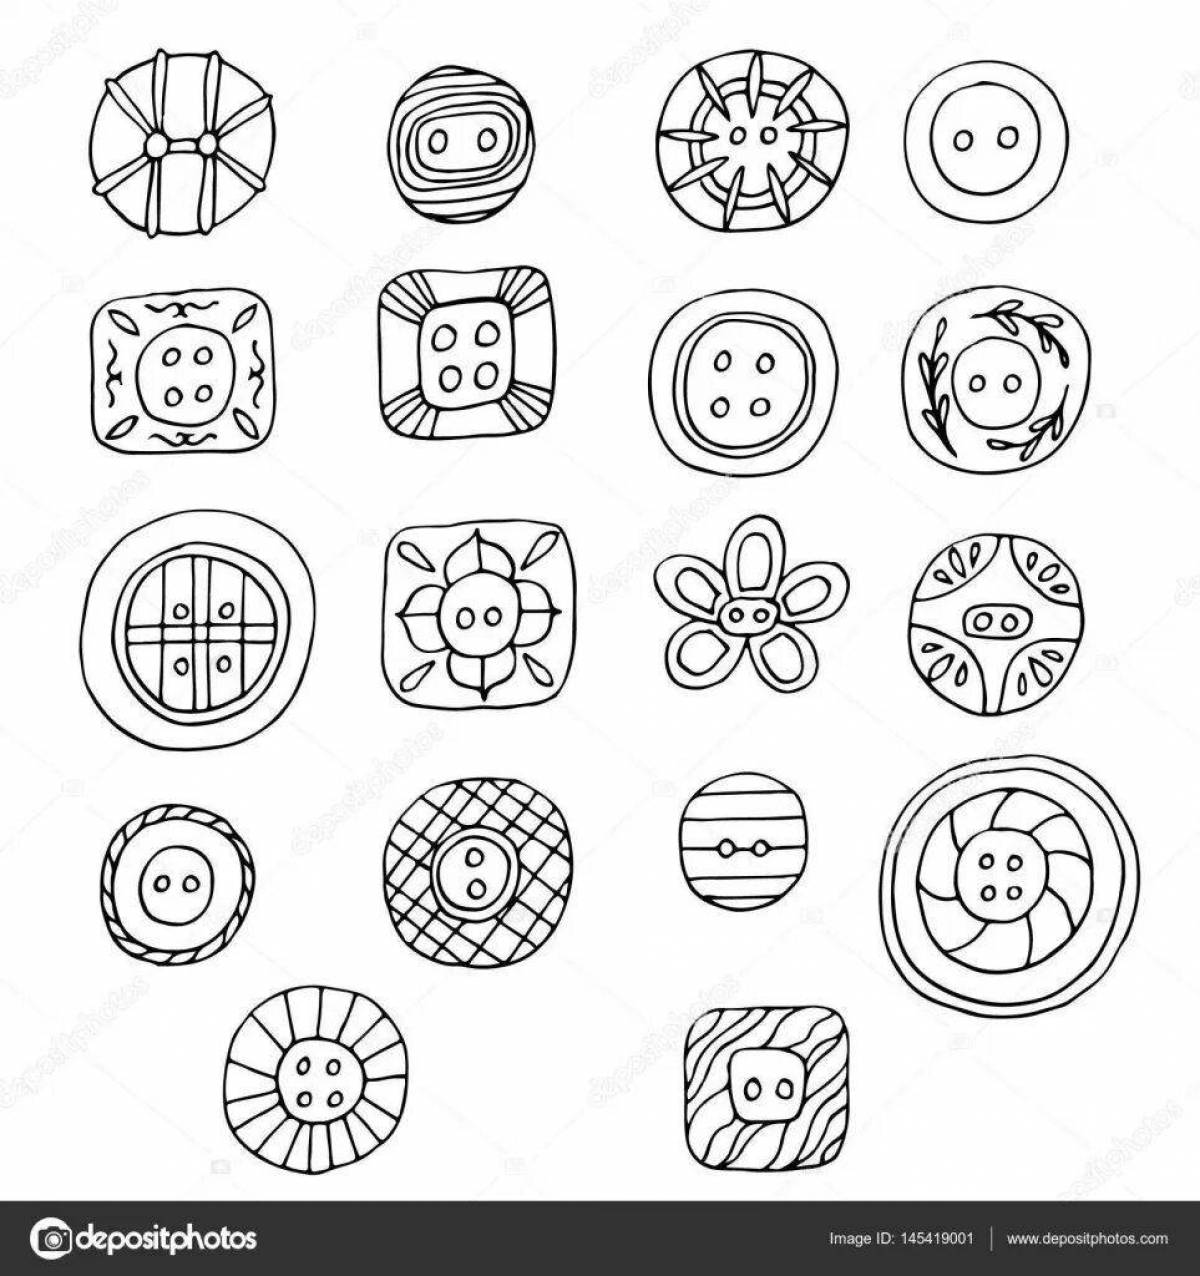 Playful button coloring page